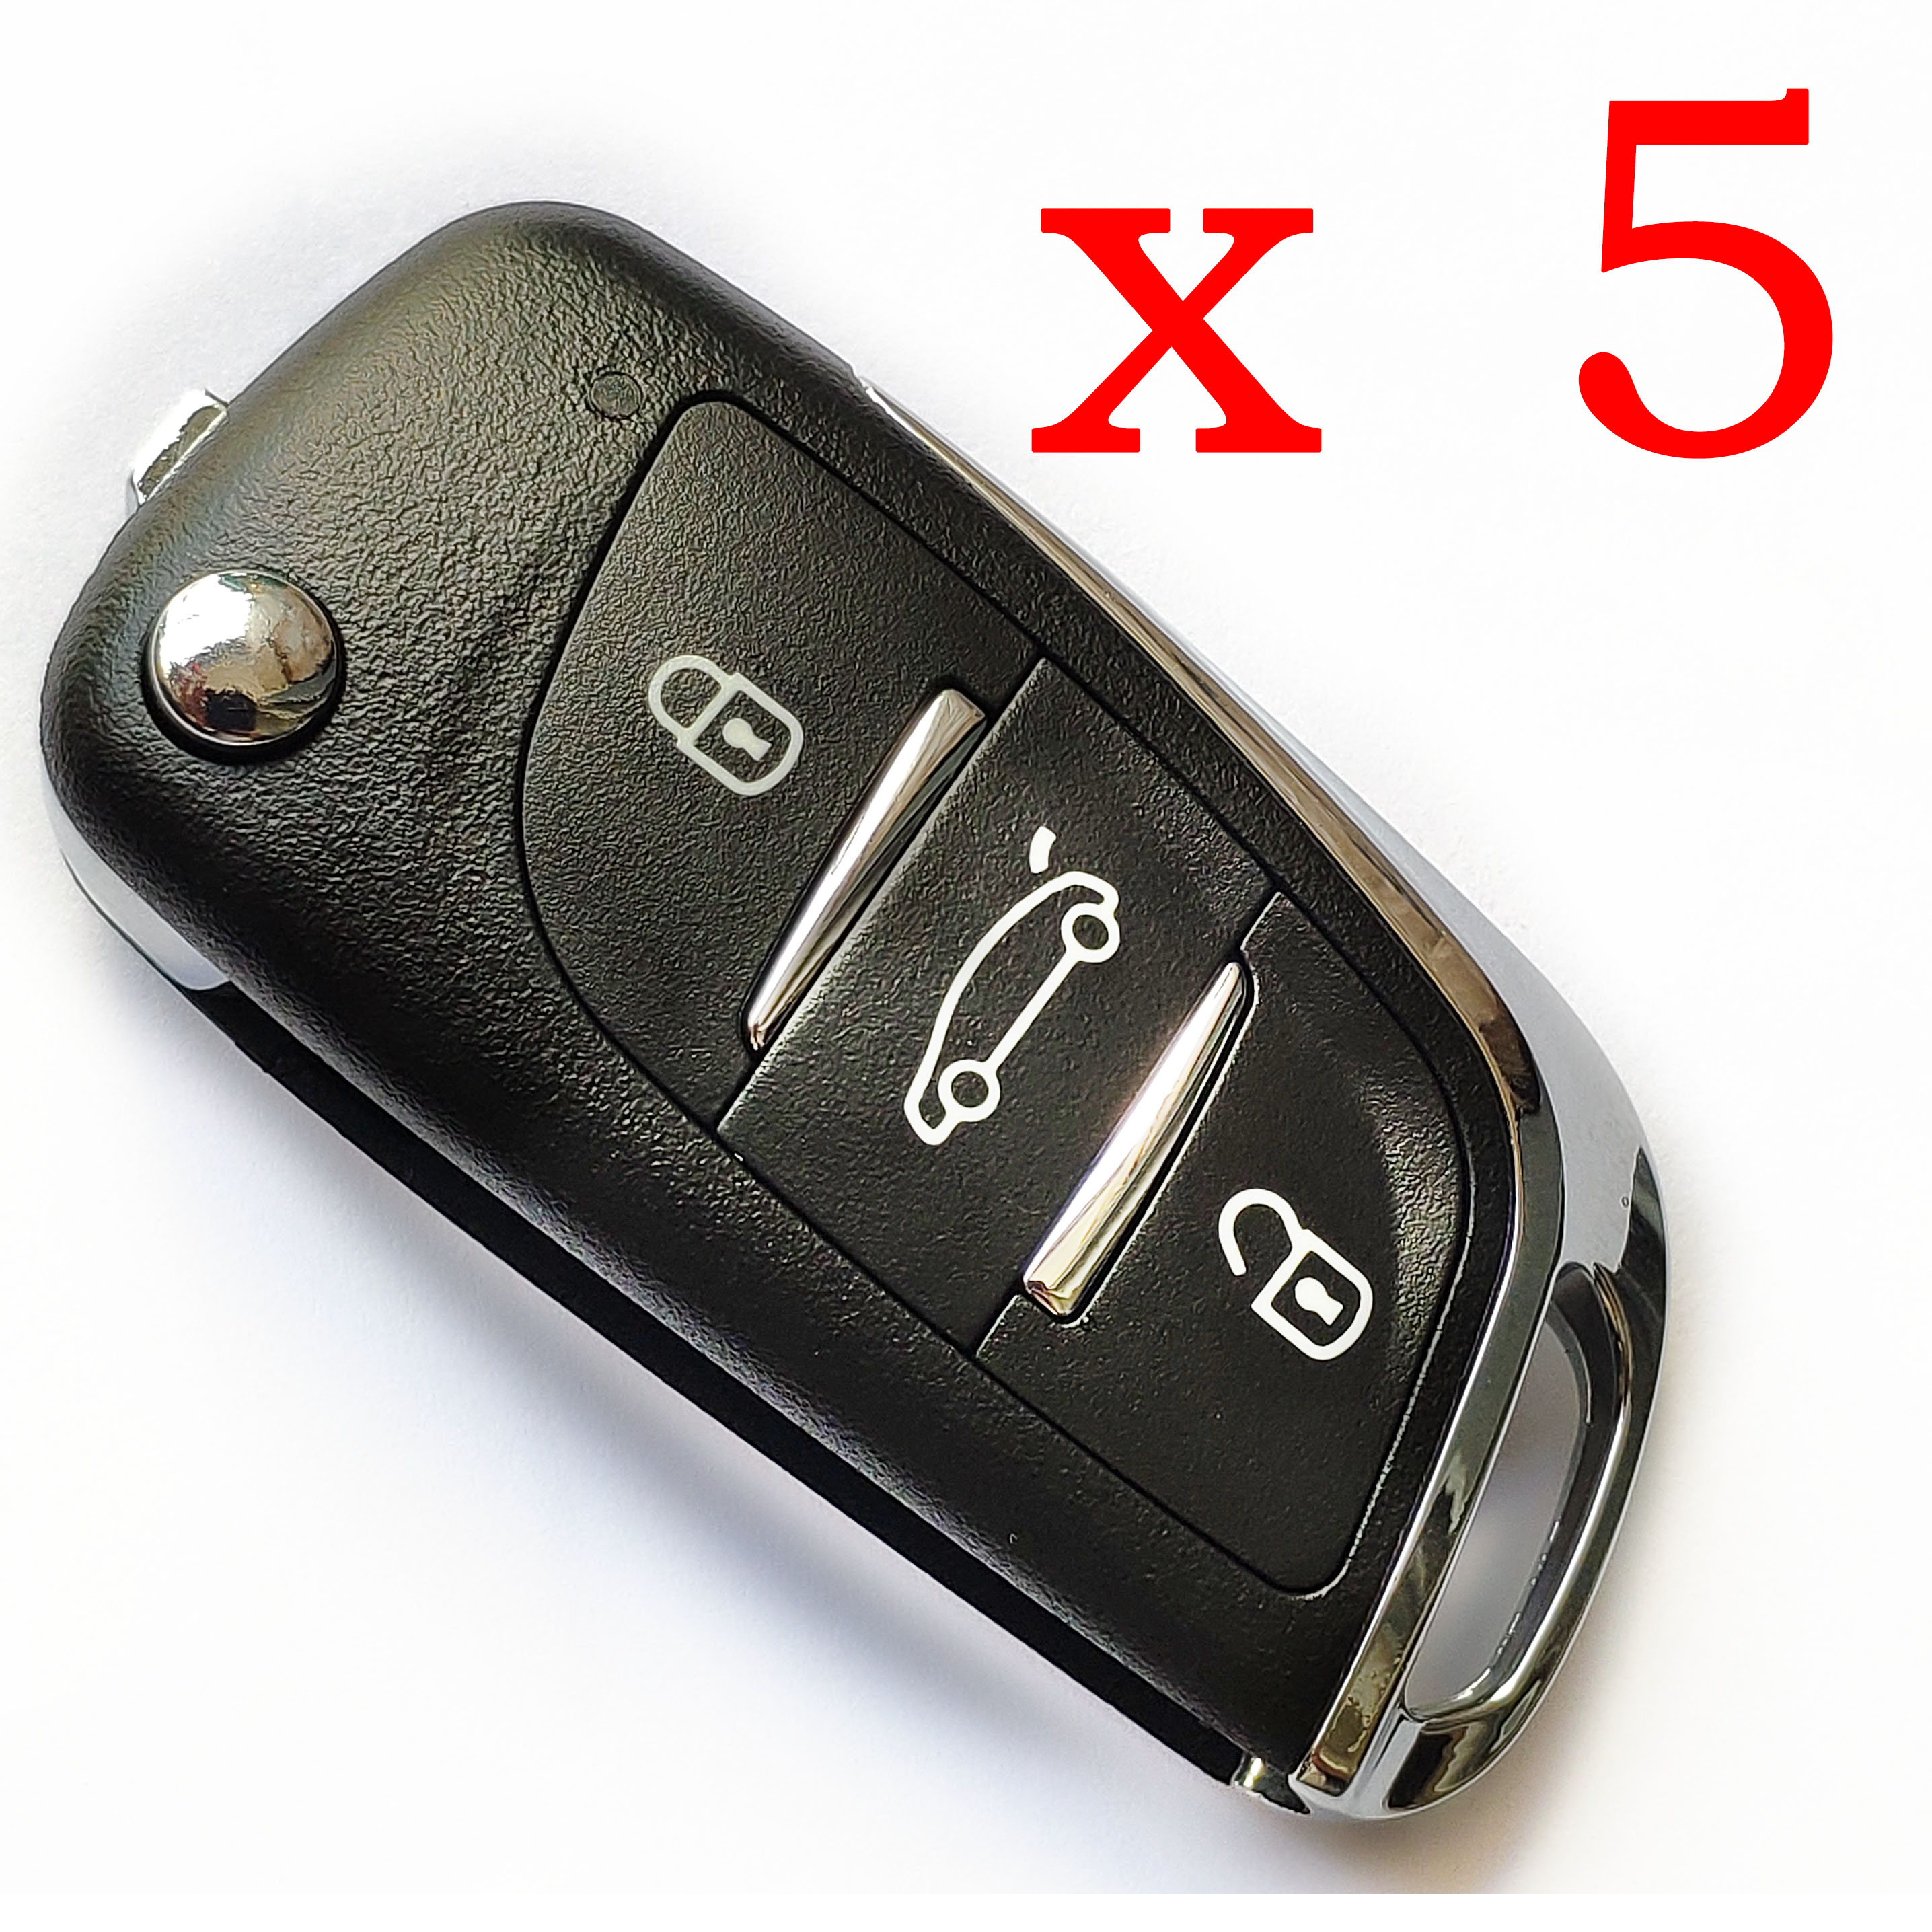 5 pieces Xhorse VVDI DS Wire Type Universal Remote Key - with Blades & Logos - XKDS00EN